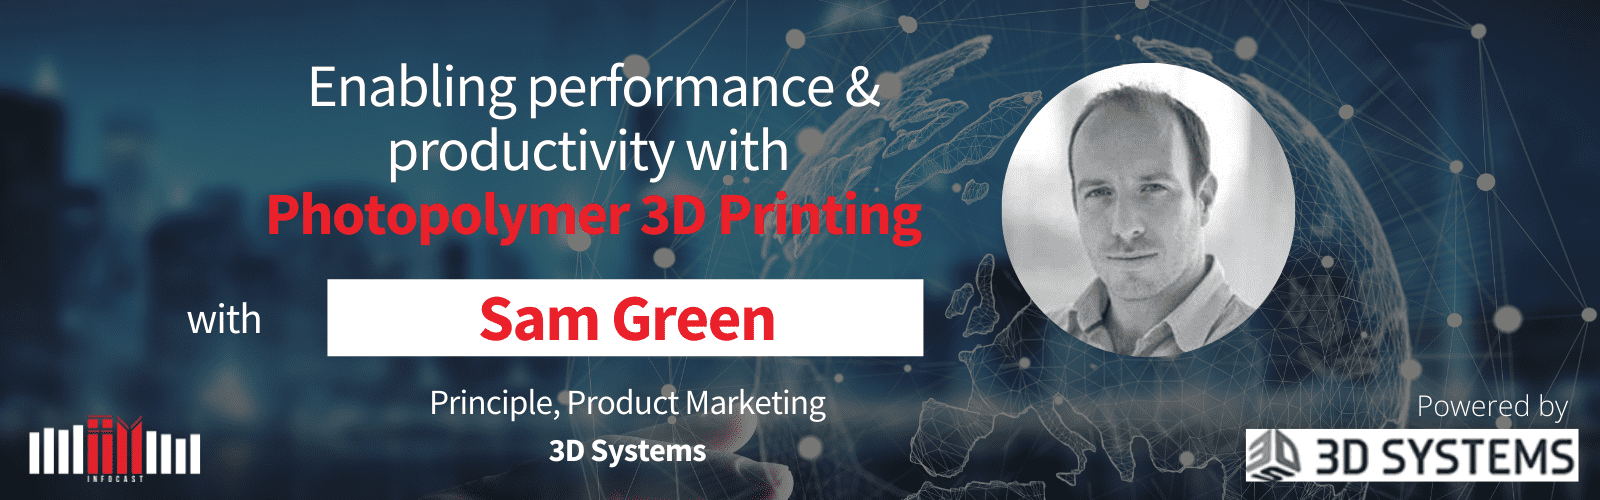 Enabling performance & productivity with Photopolymer 3D Printing with Sam Green